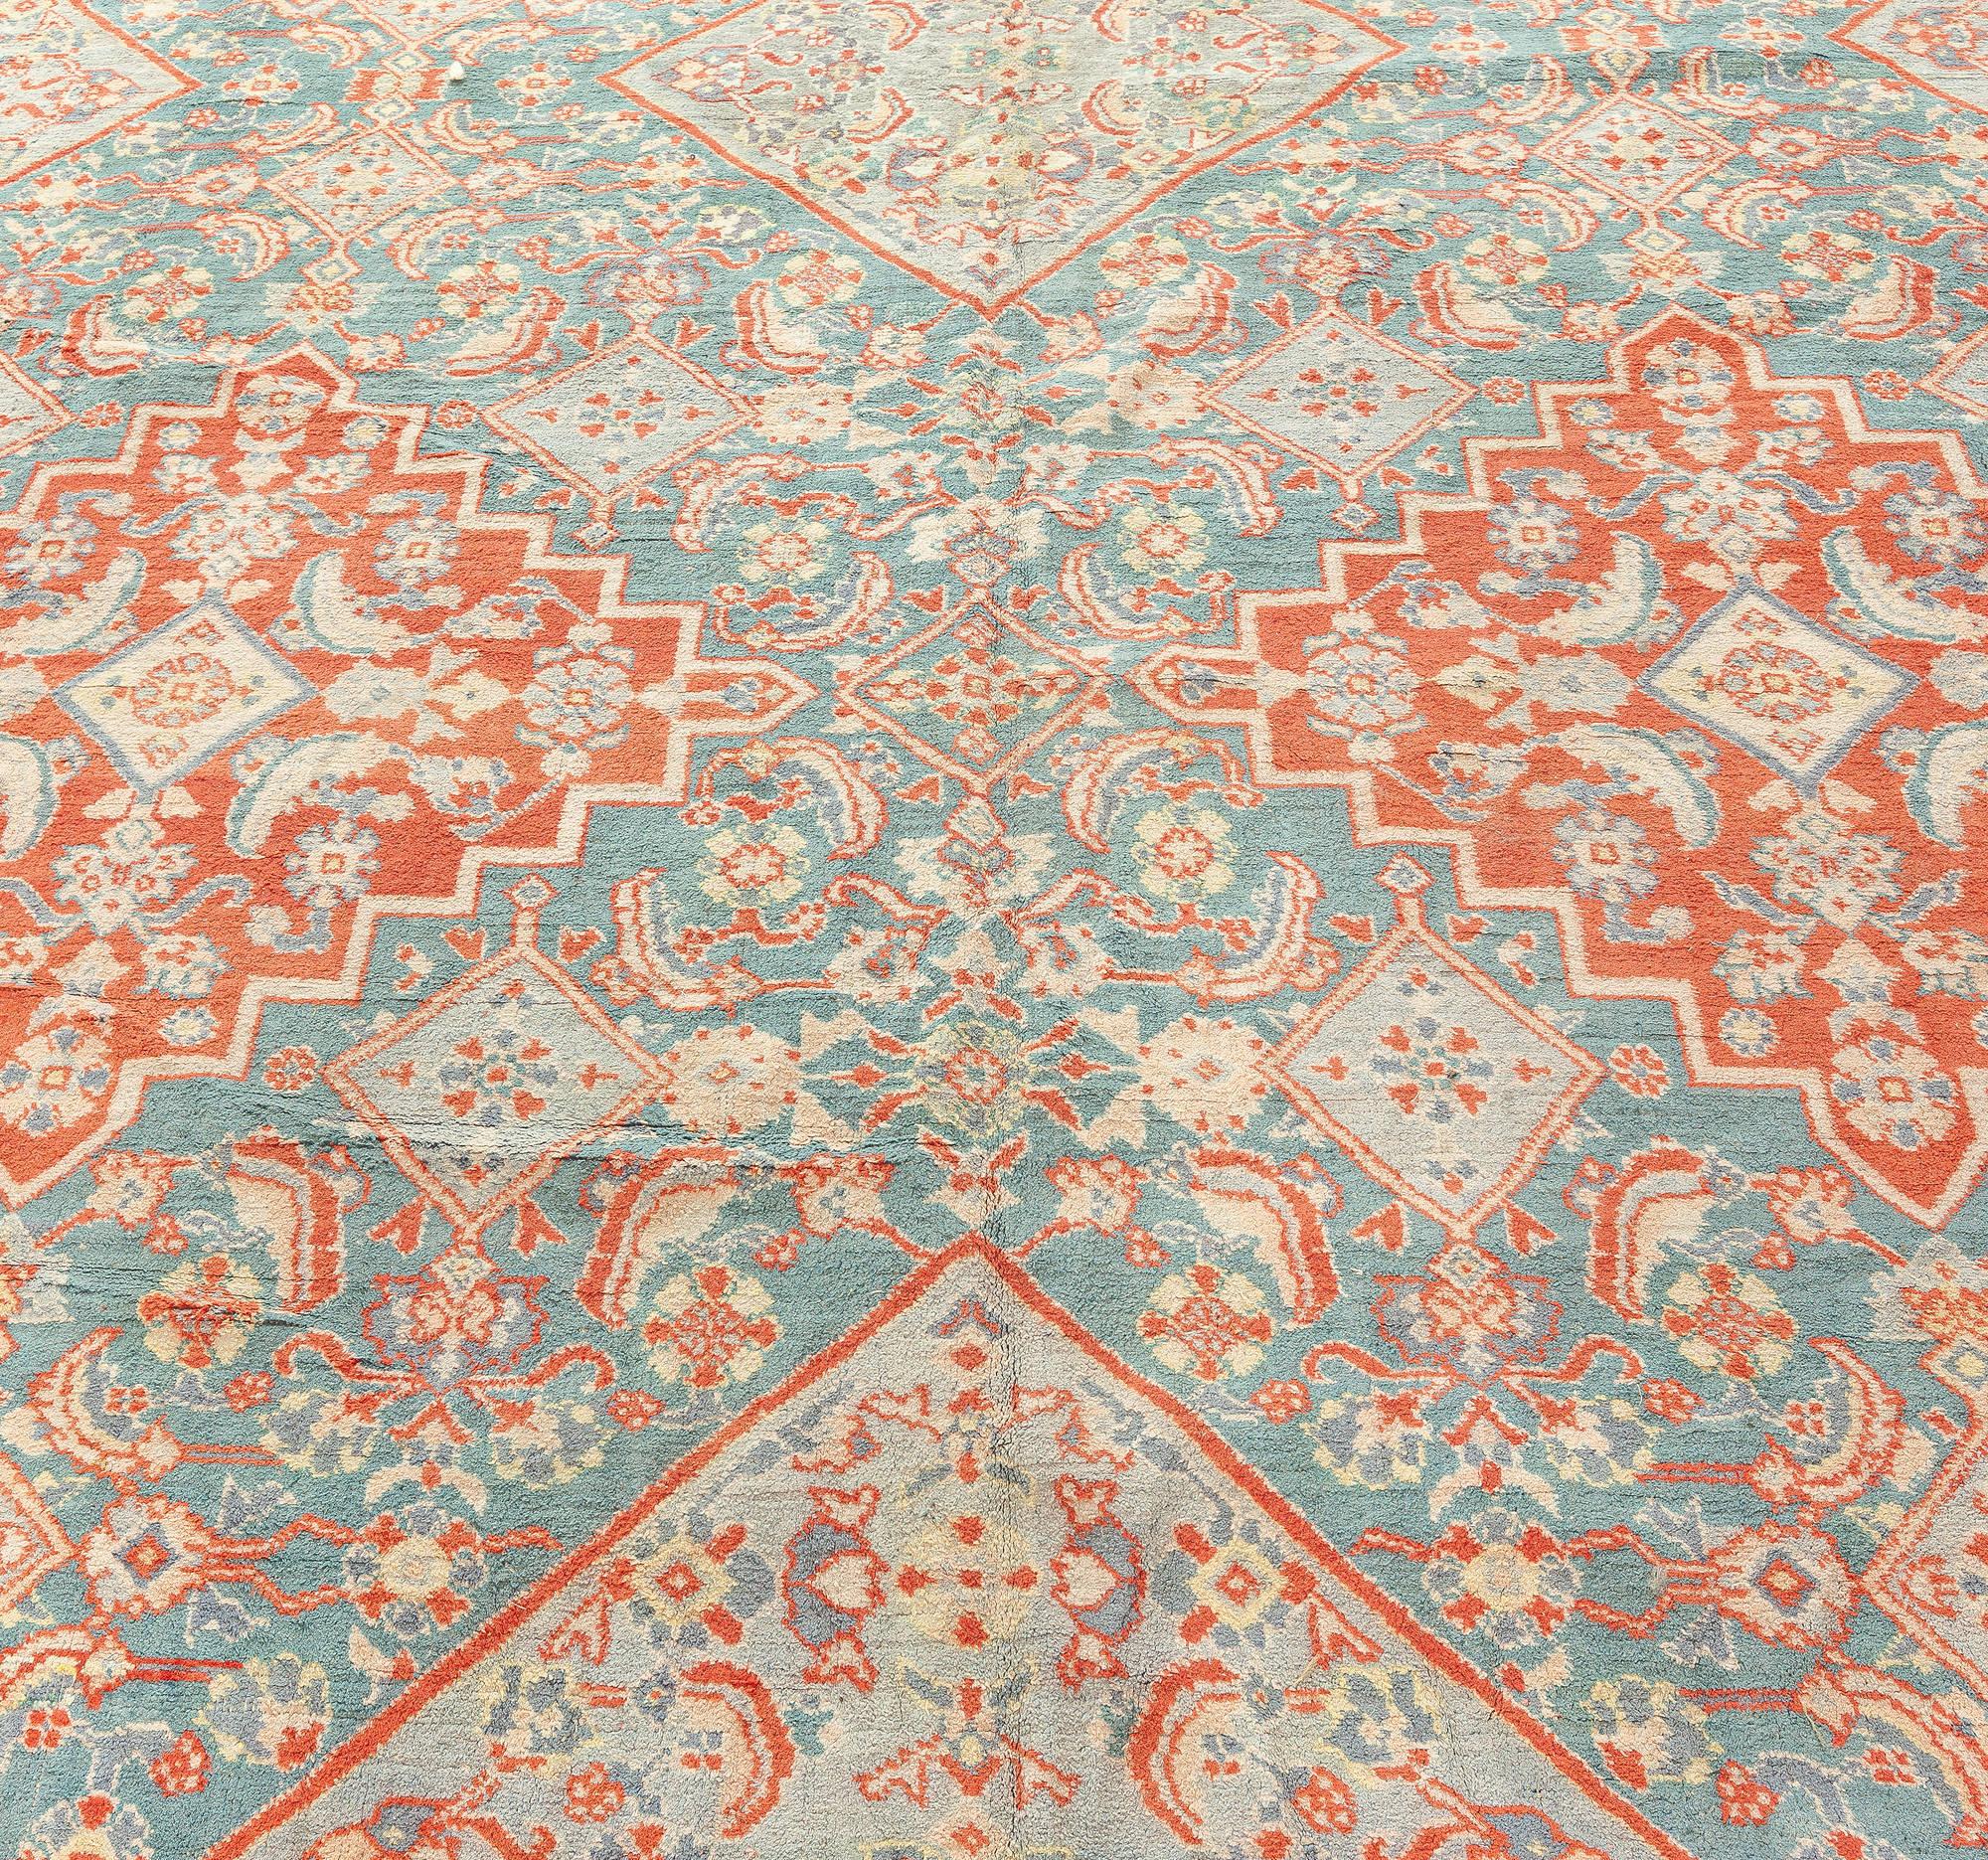 Fine Antique Indian Agra red and blue handmade rug
Size: 13'4